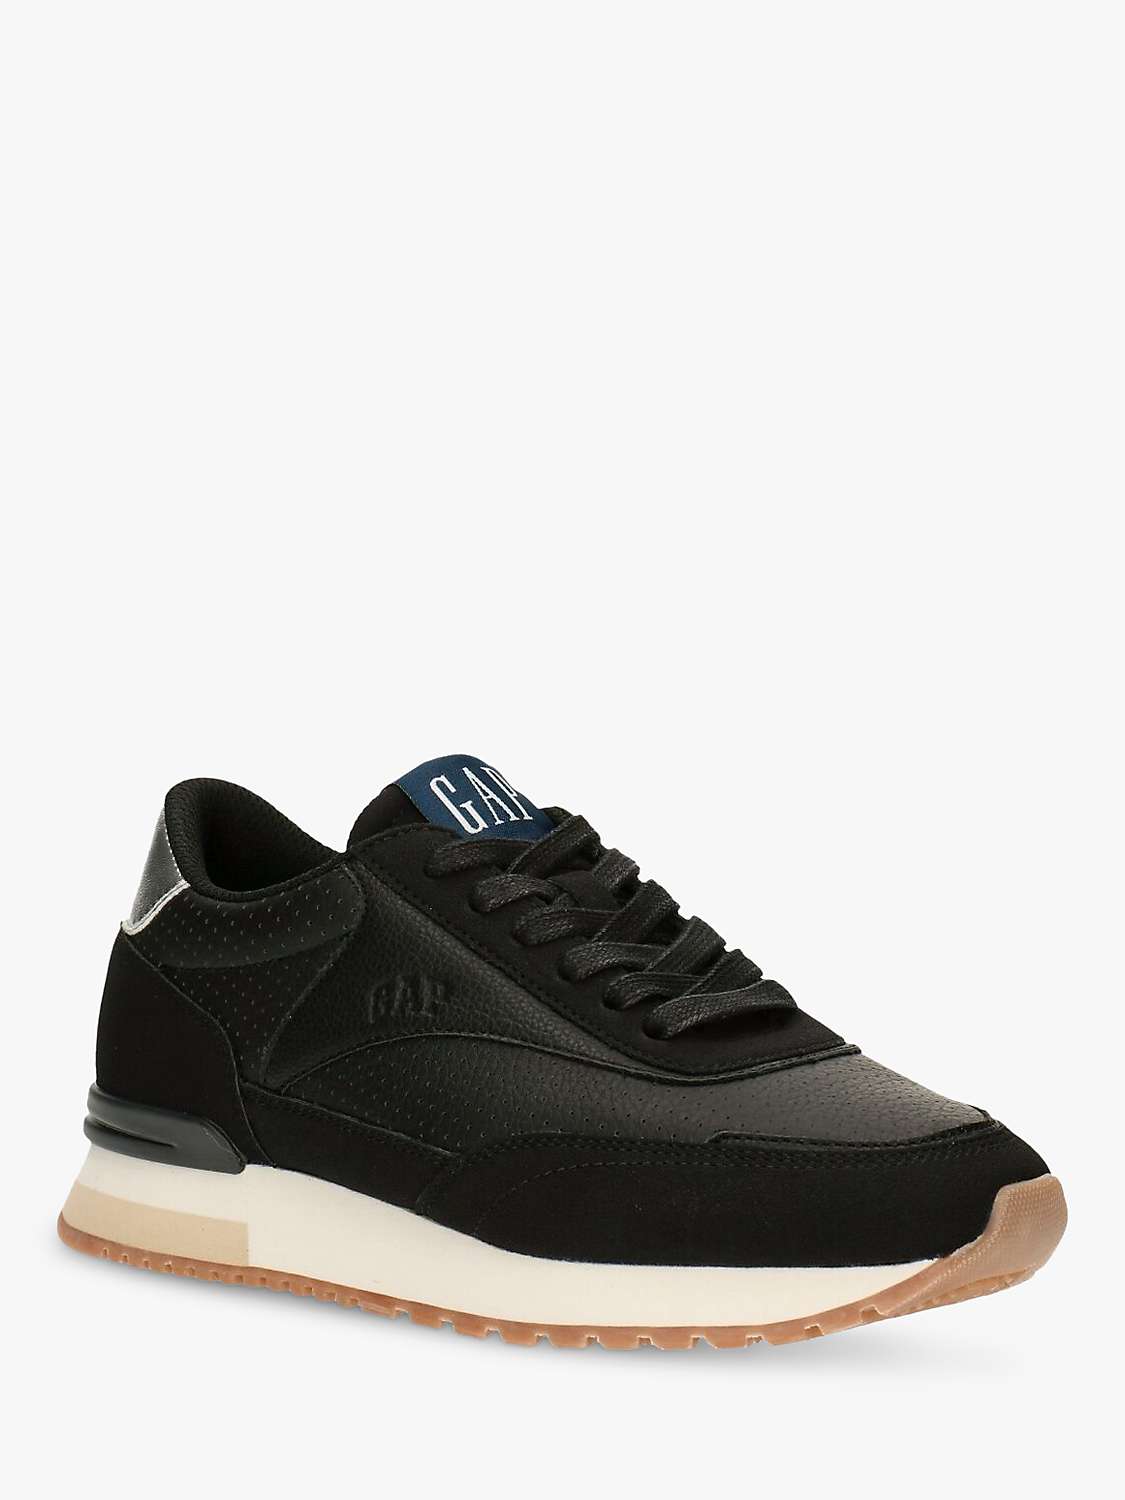 Buy Gap Kids' New York Lace Up Trainers, Black Online at johnlewis.com